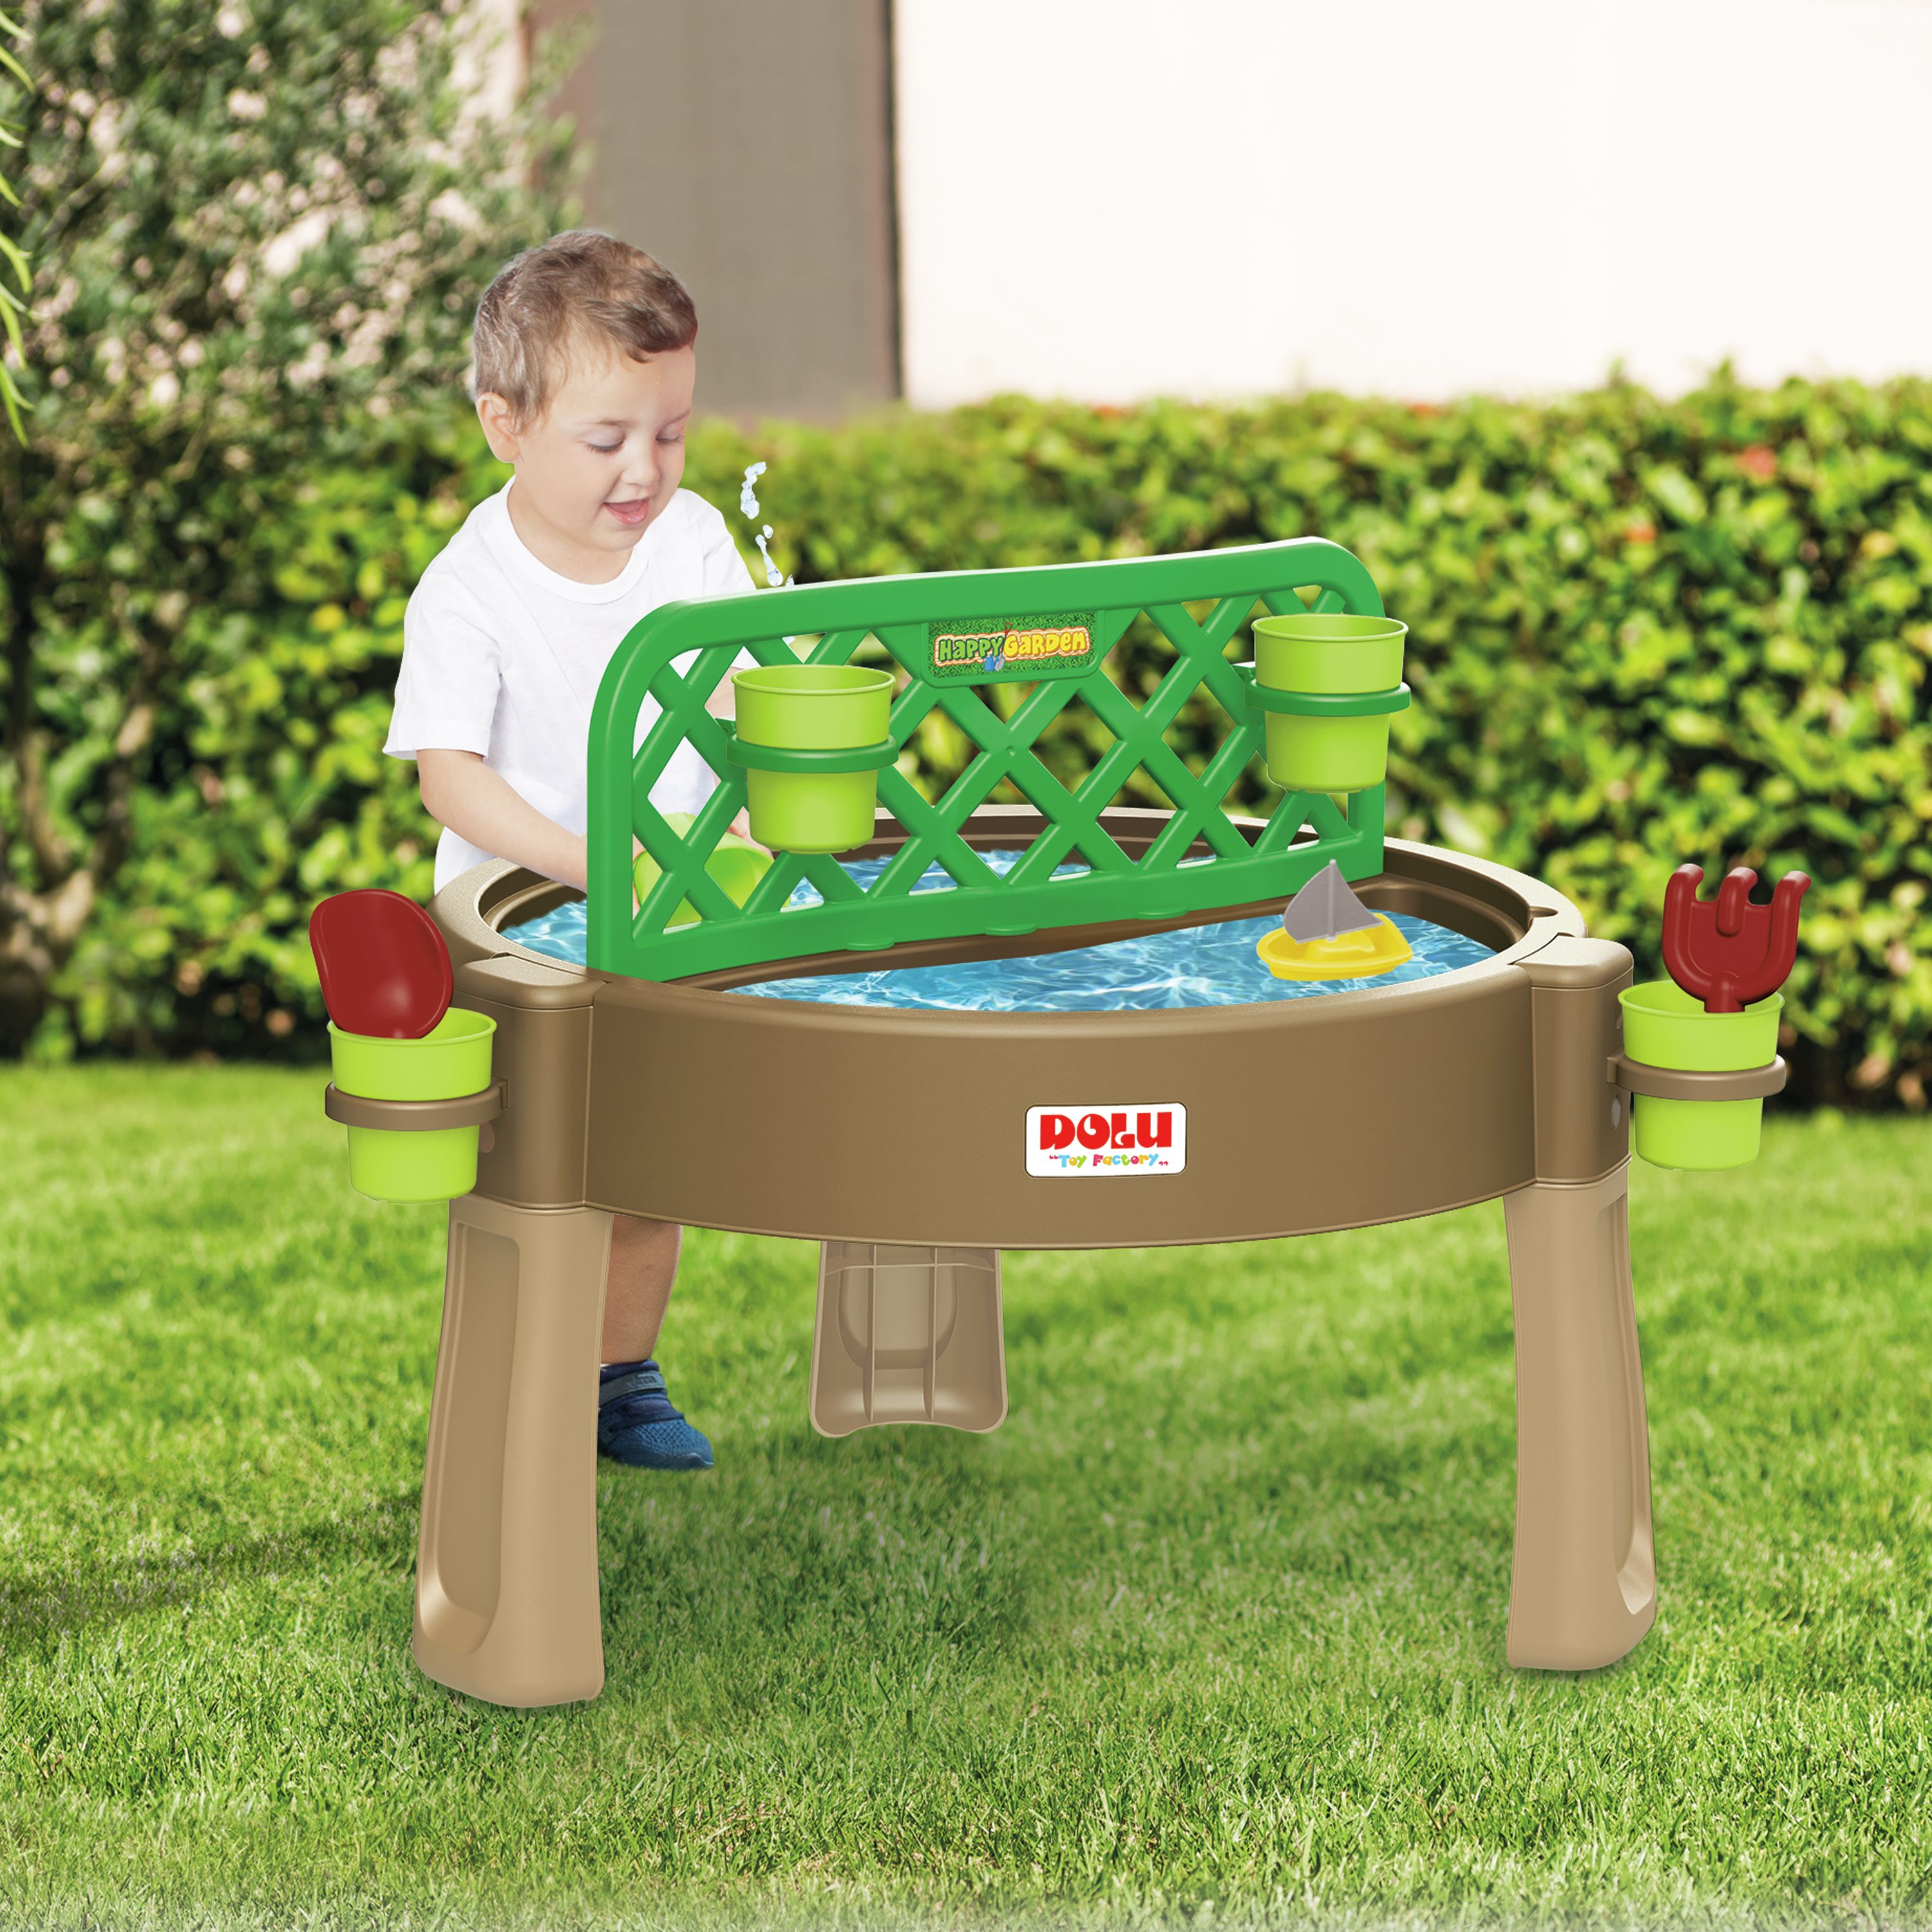 Dolu 4-in-1 Sand & Water Plastic Activity table